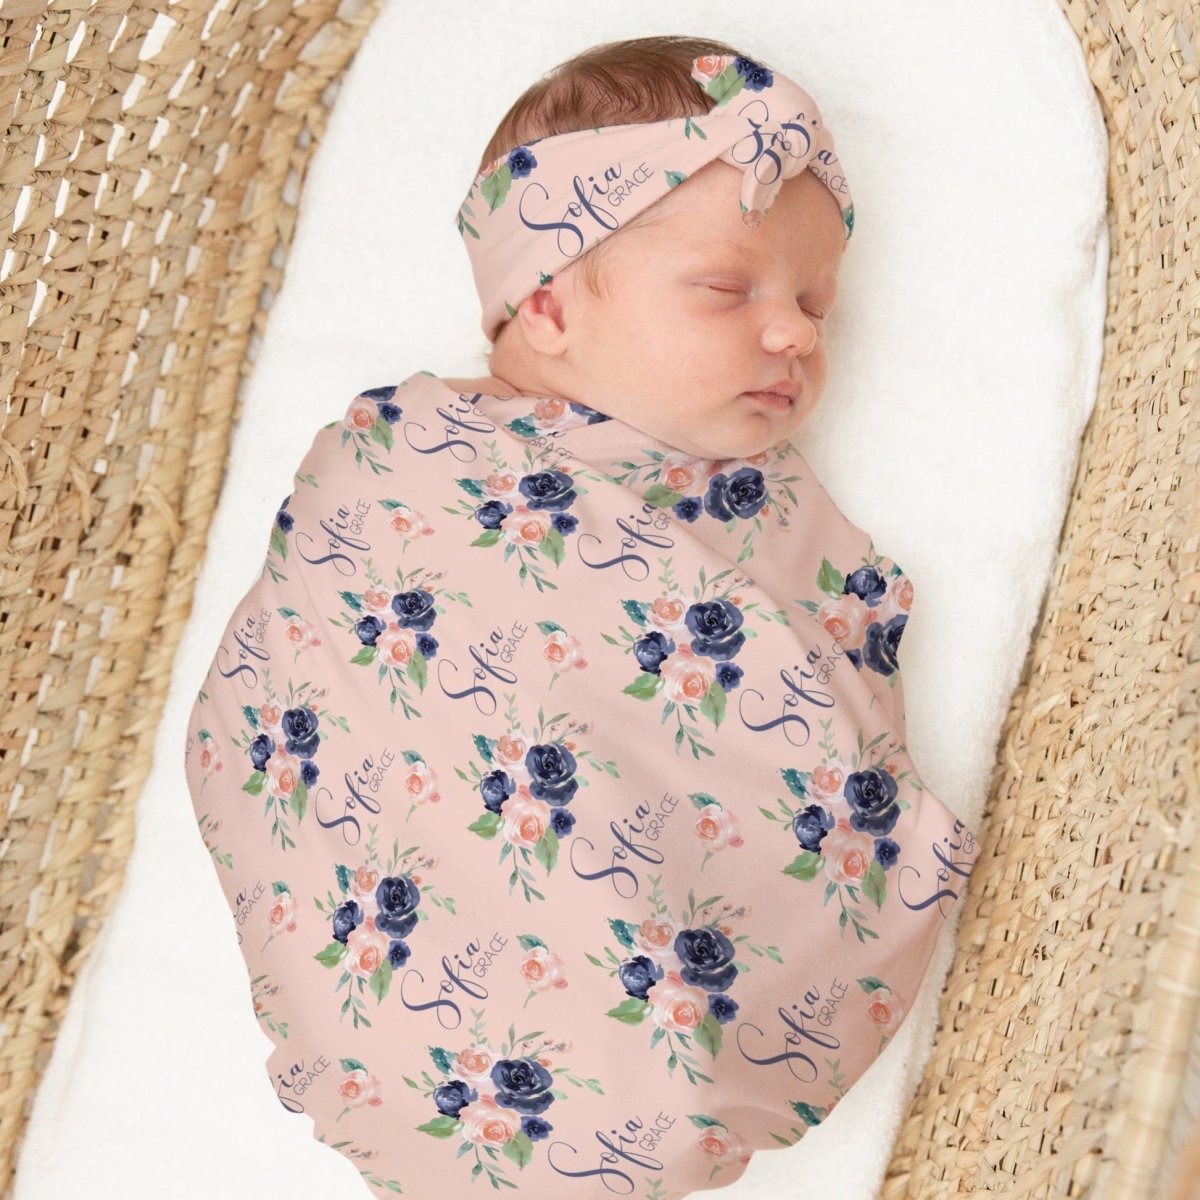 Peach & Navy Floral Personalized Swaddle Blanket Set - gender_girl, Peach & Navy Floral, text